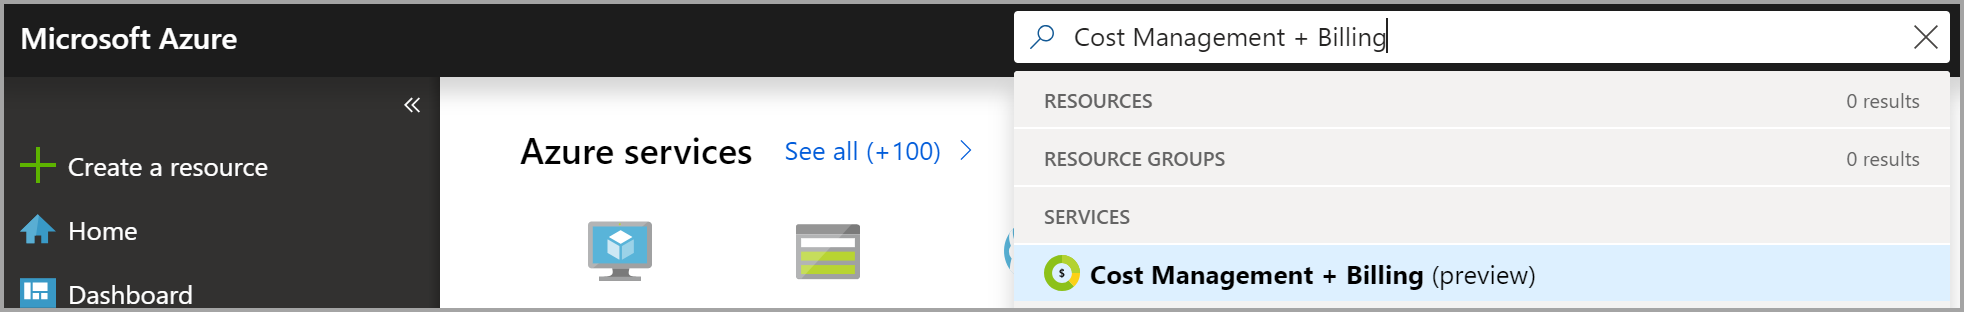 Screenshot that shows Azure portal search for cost management + billing to request billing ownership.